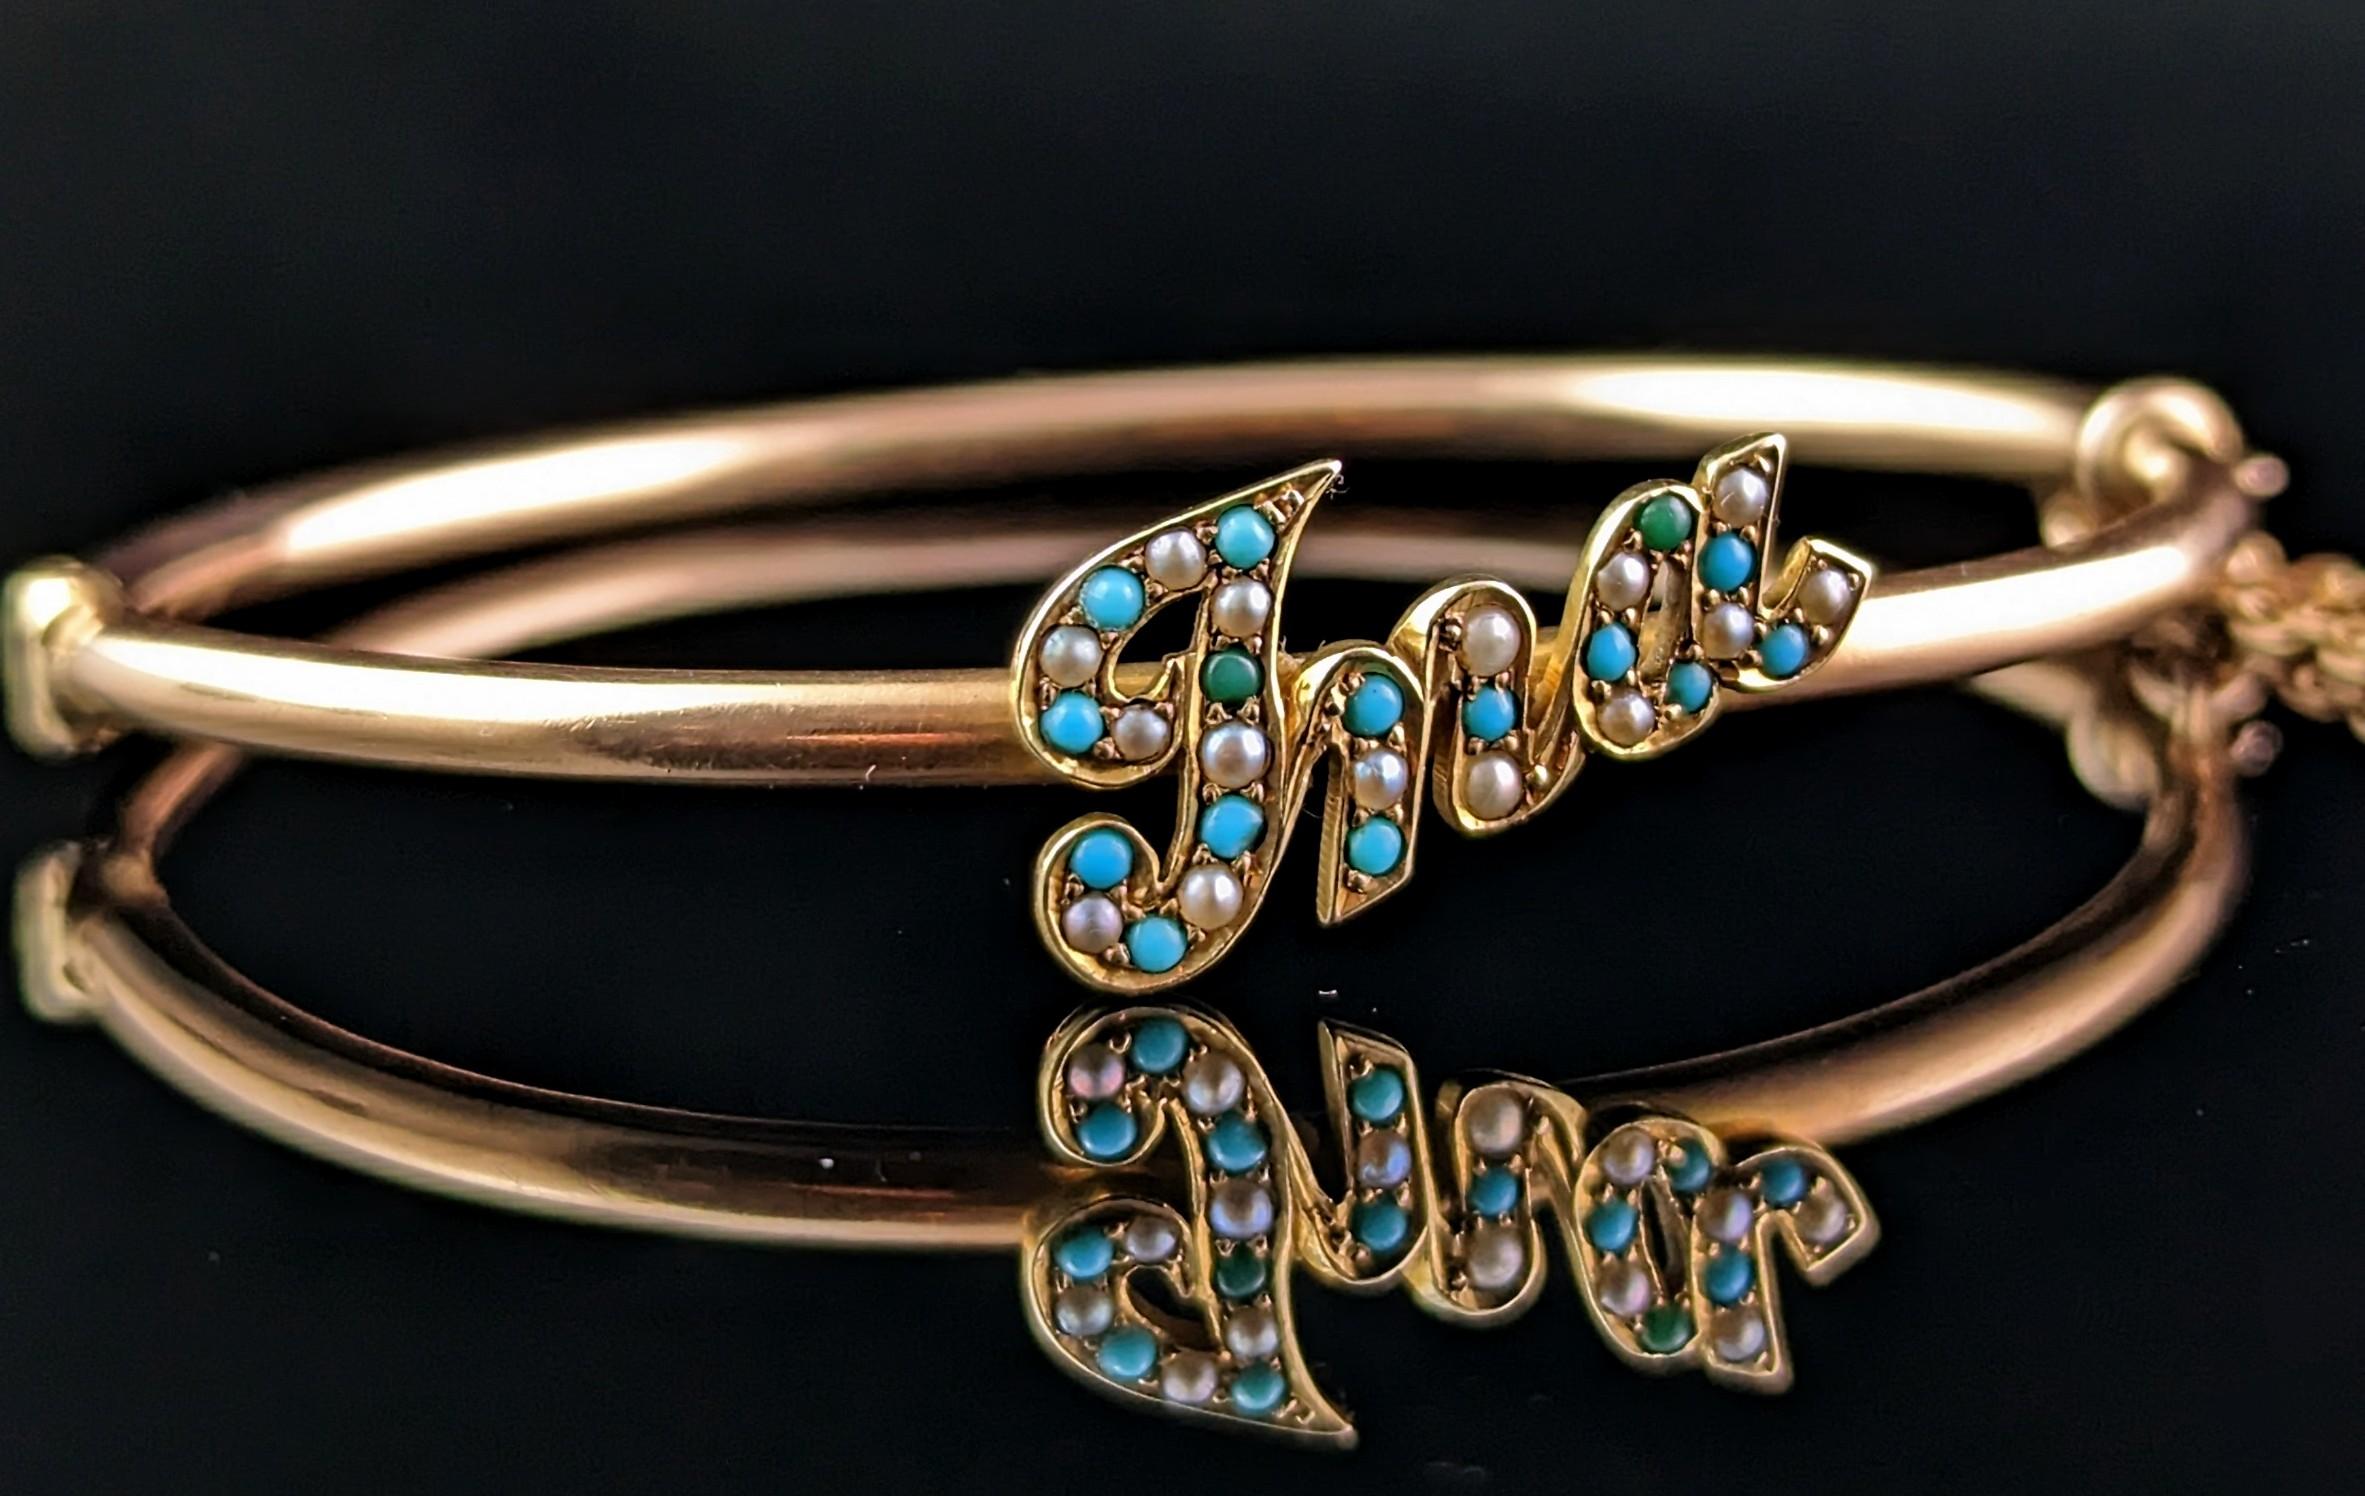 Antique 15k Rose Gold Name Bangle, Ina, Turquoise and Pearl 2